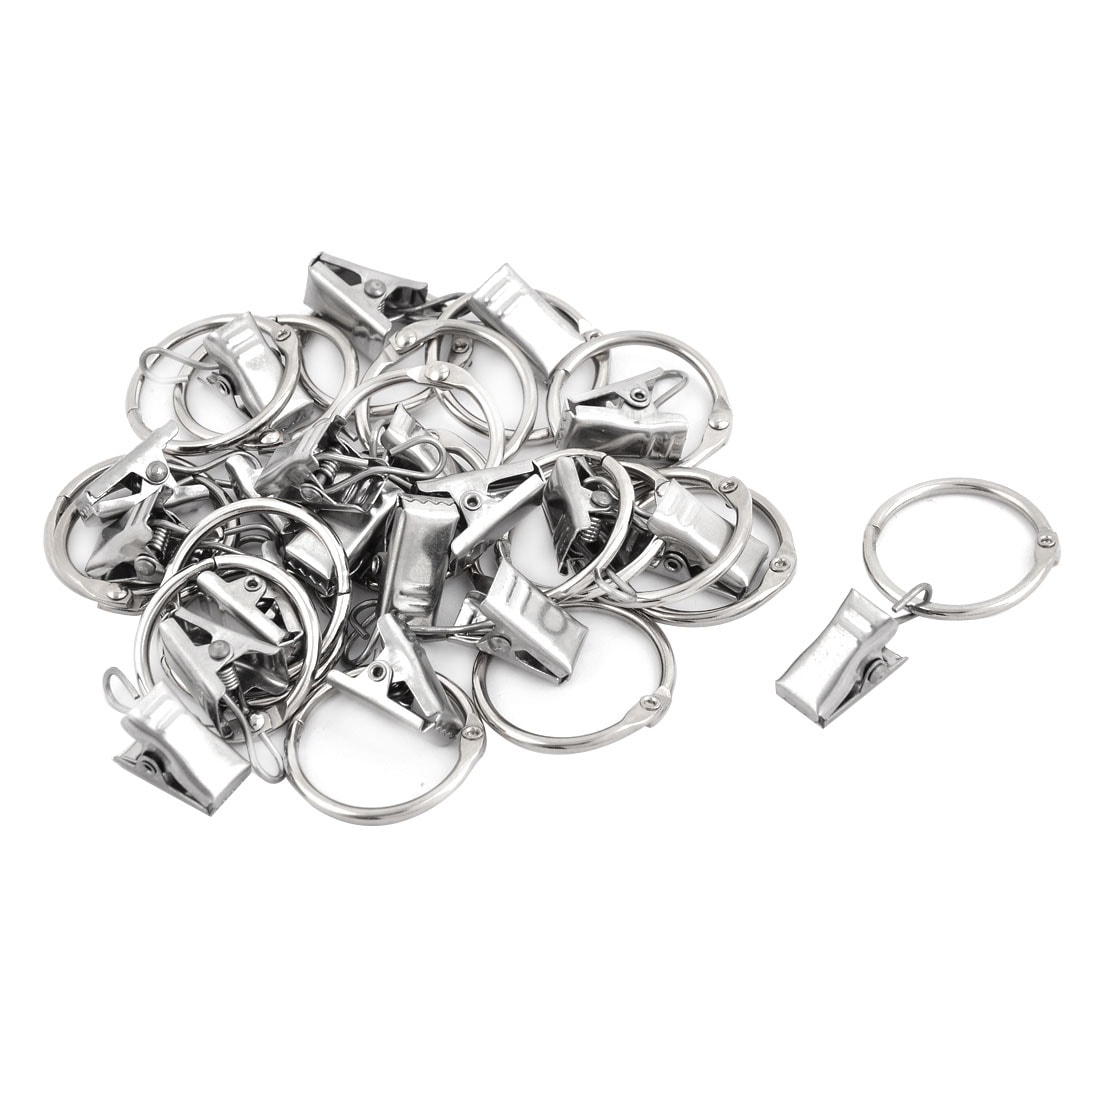 20pcs Stainless Steel Shower Bath Window Curtain Rod Clips Hook Clip Rings CA 